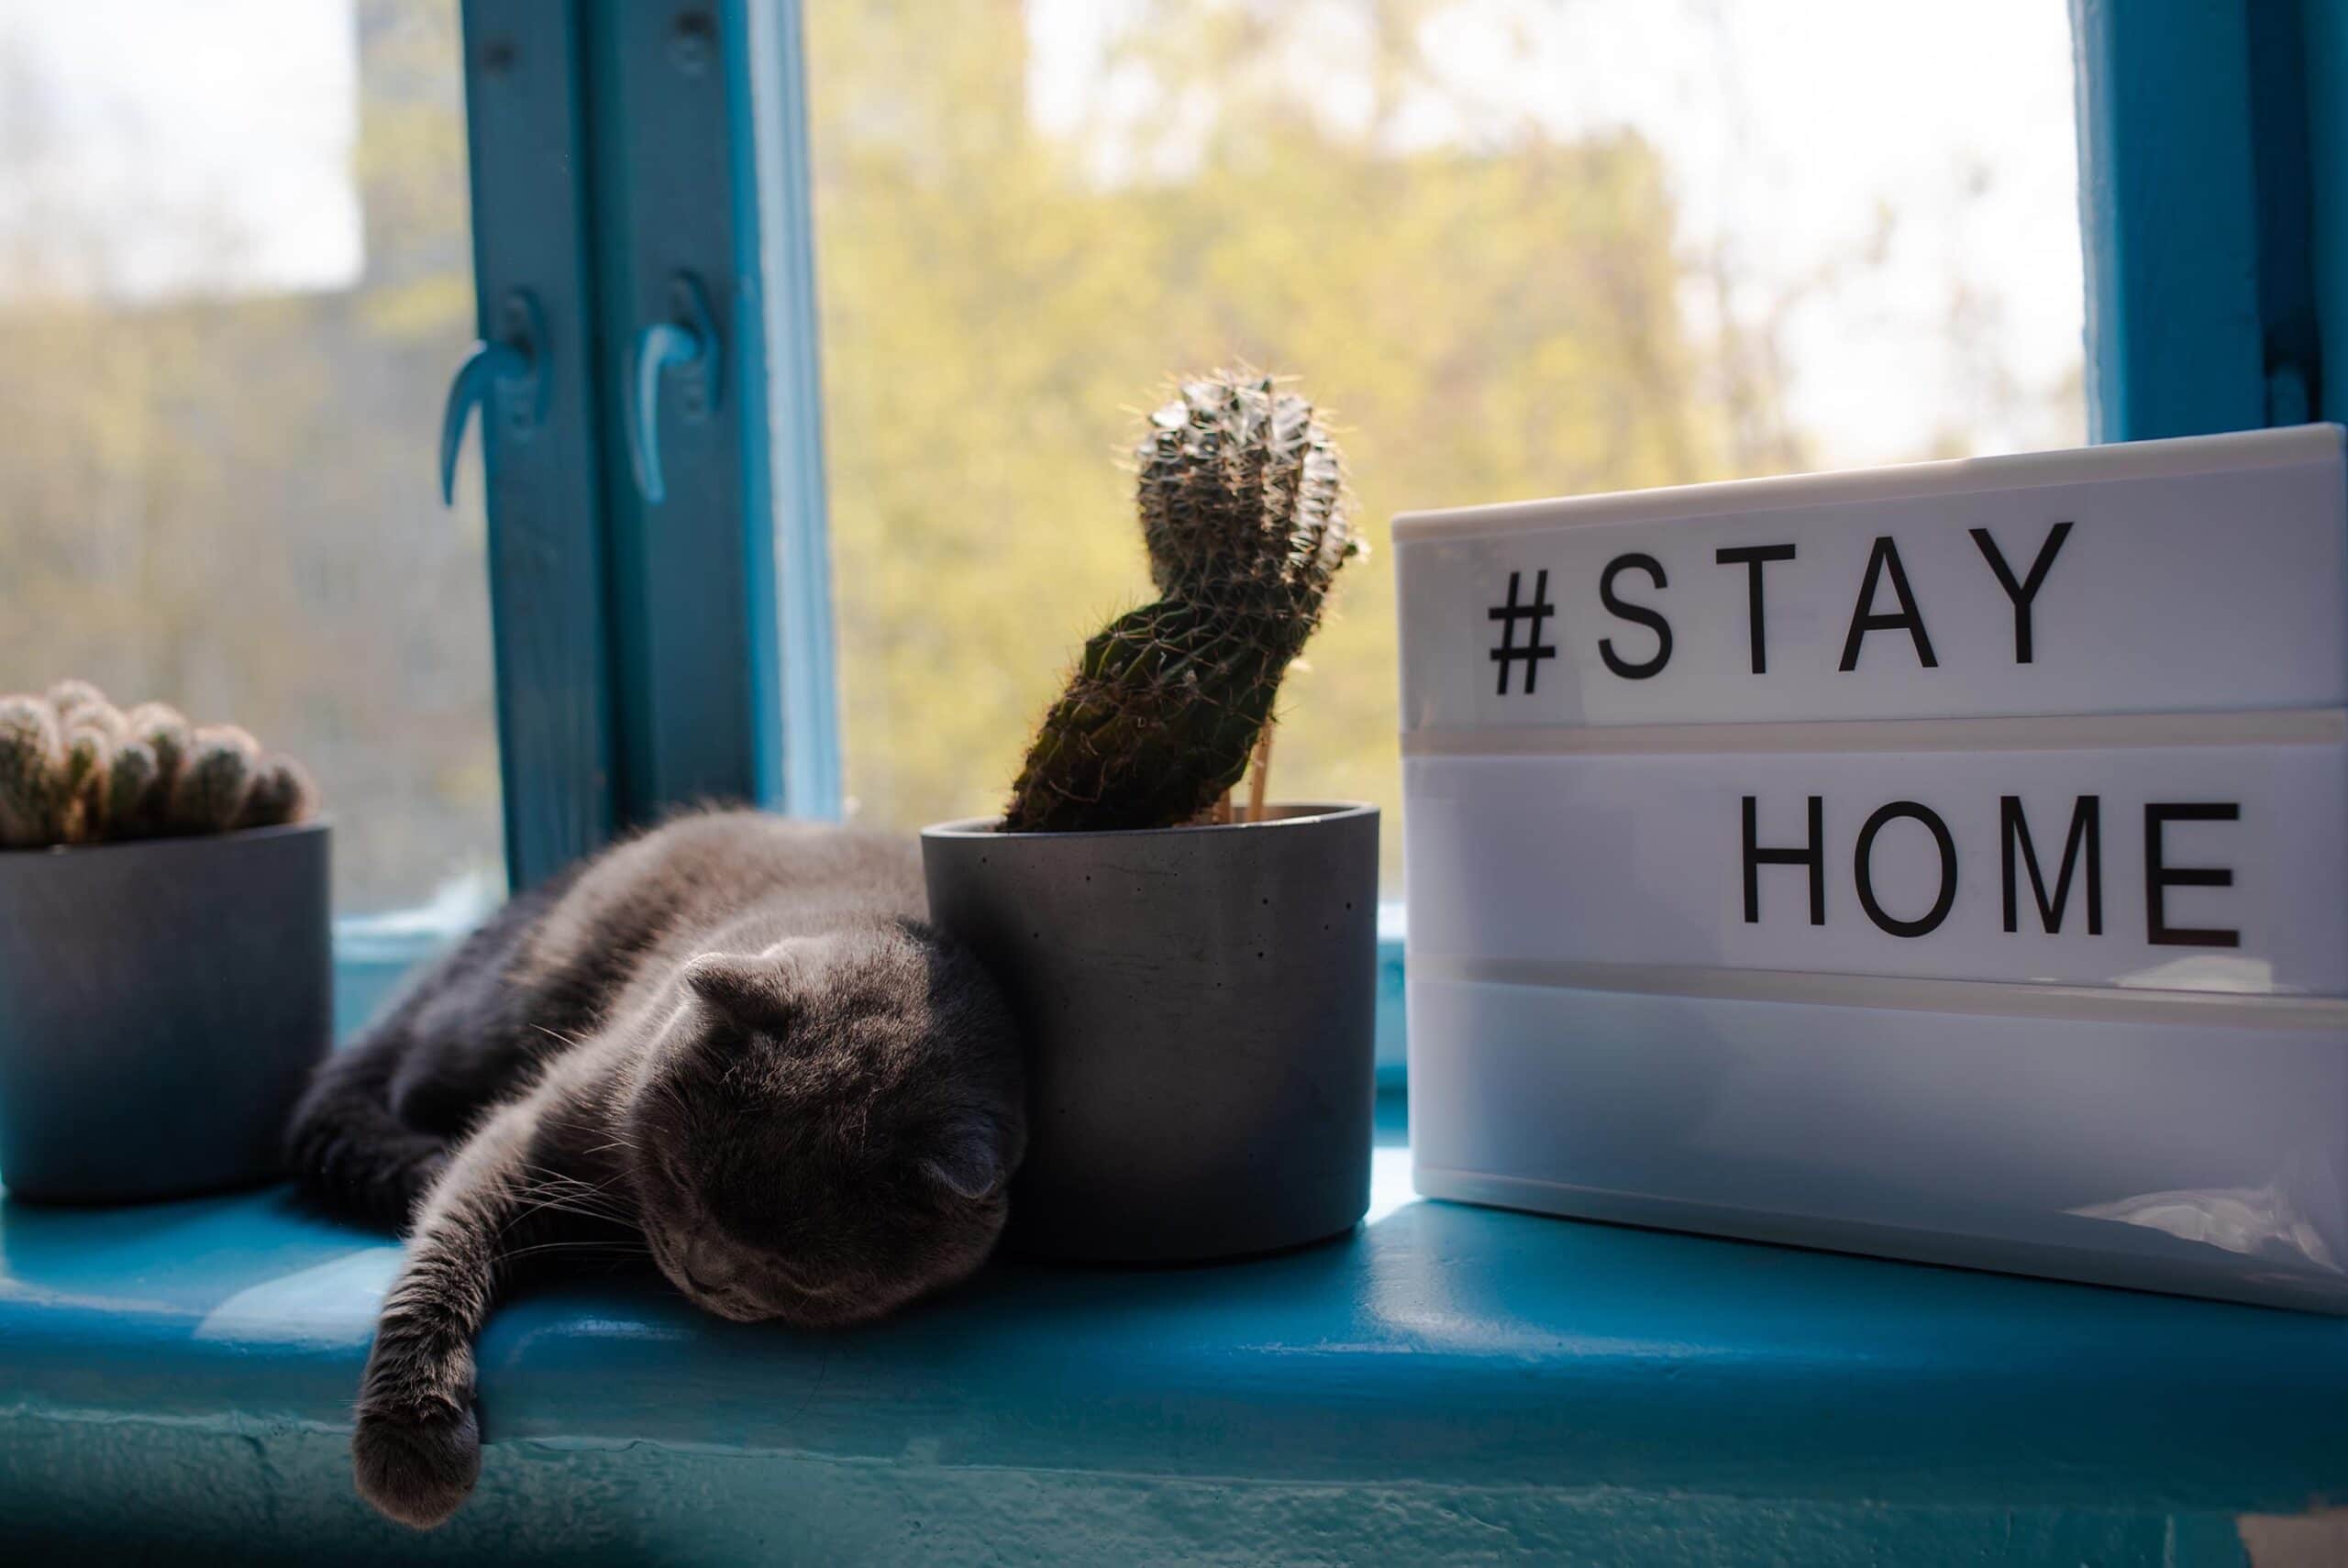 Lightbox sign with text hashtag STAY HOME with sleepy cat, cactus pot home decor. COVID-19. Stay home save concept.